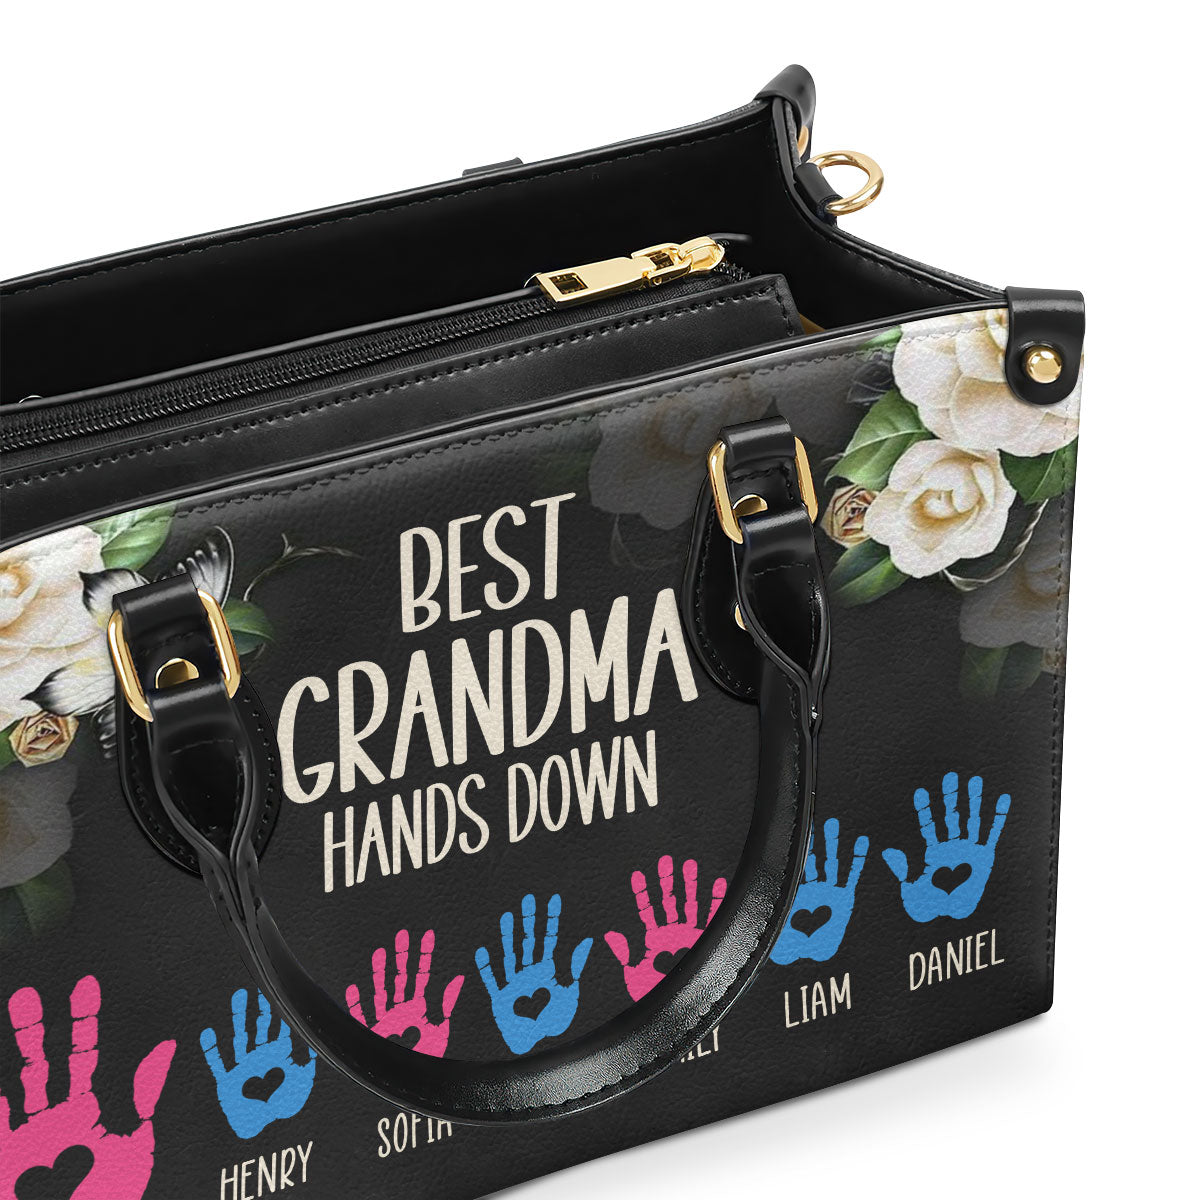 Best Grandma Hands Down | Personalized Leather Handbag With Zipper LHBH835